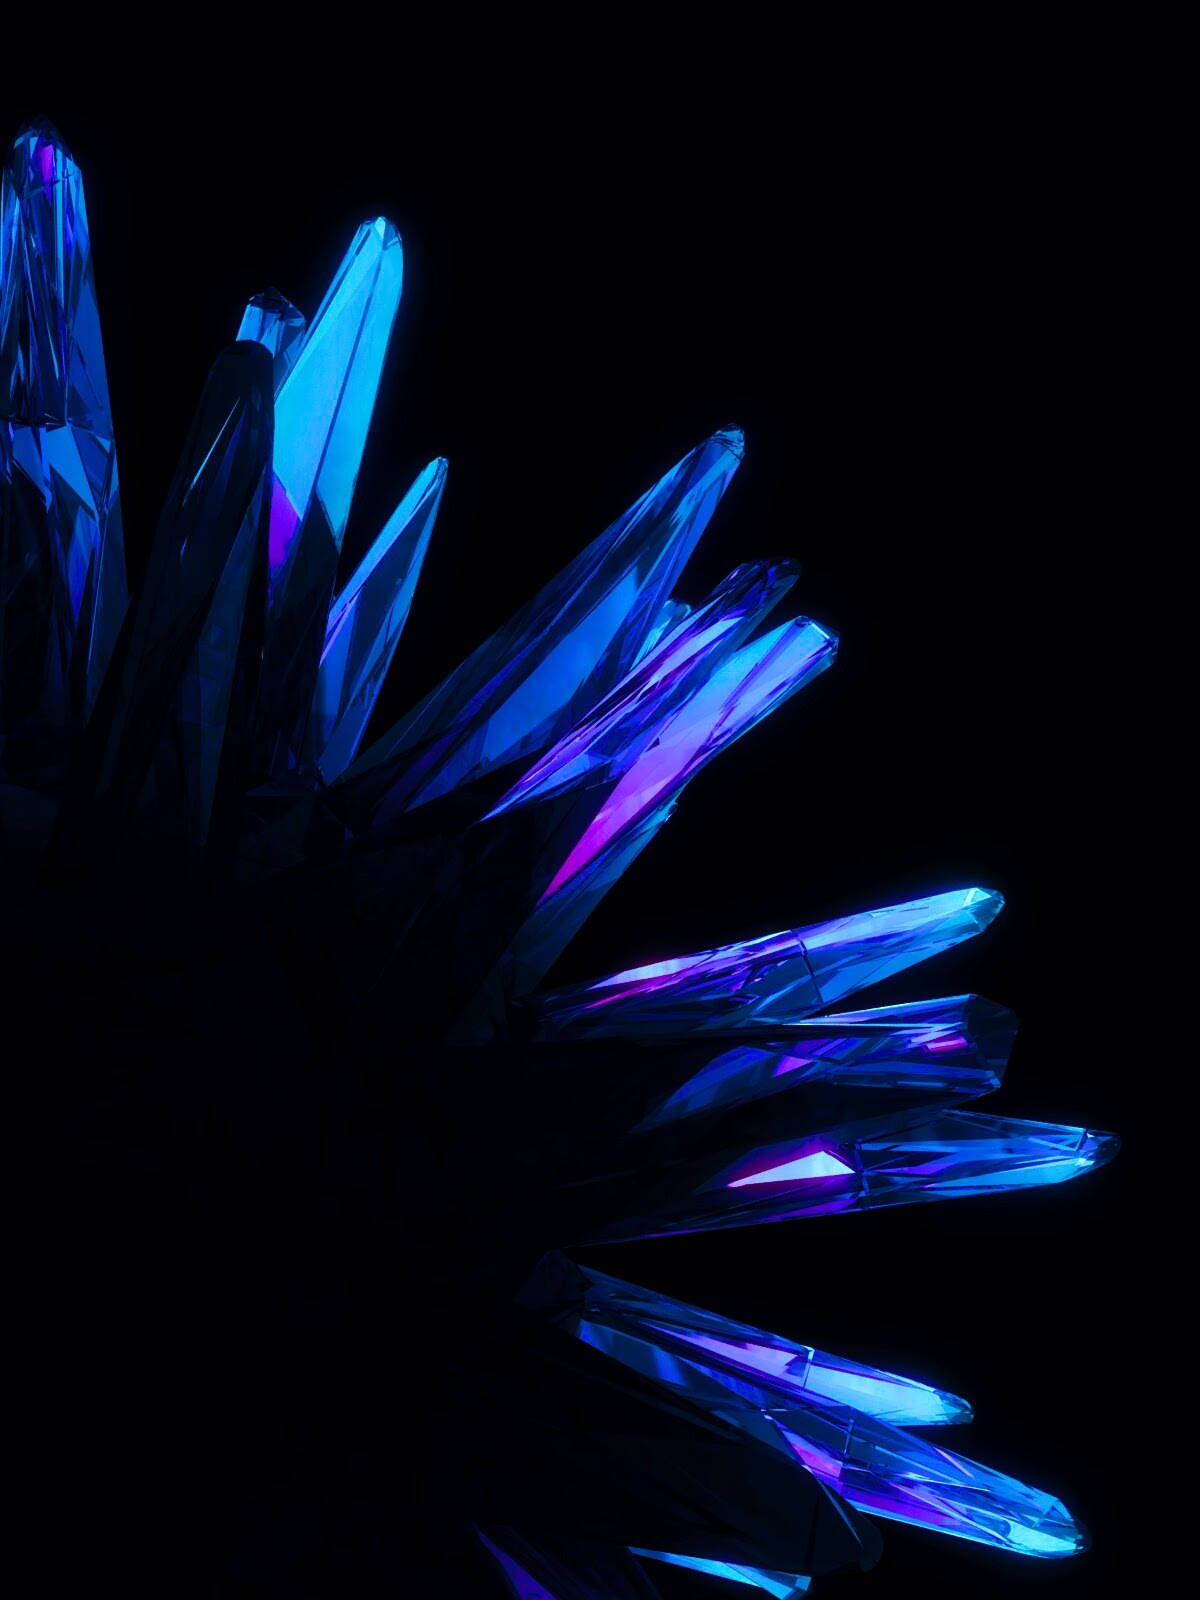 Icy Oled Crystals Background